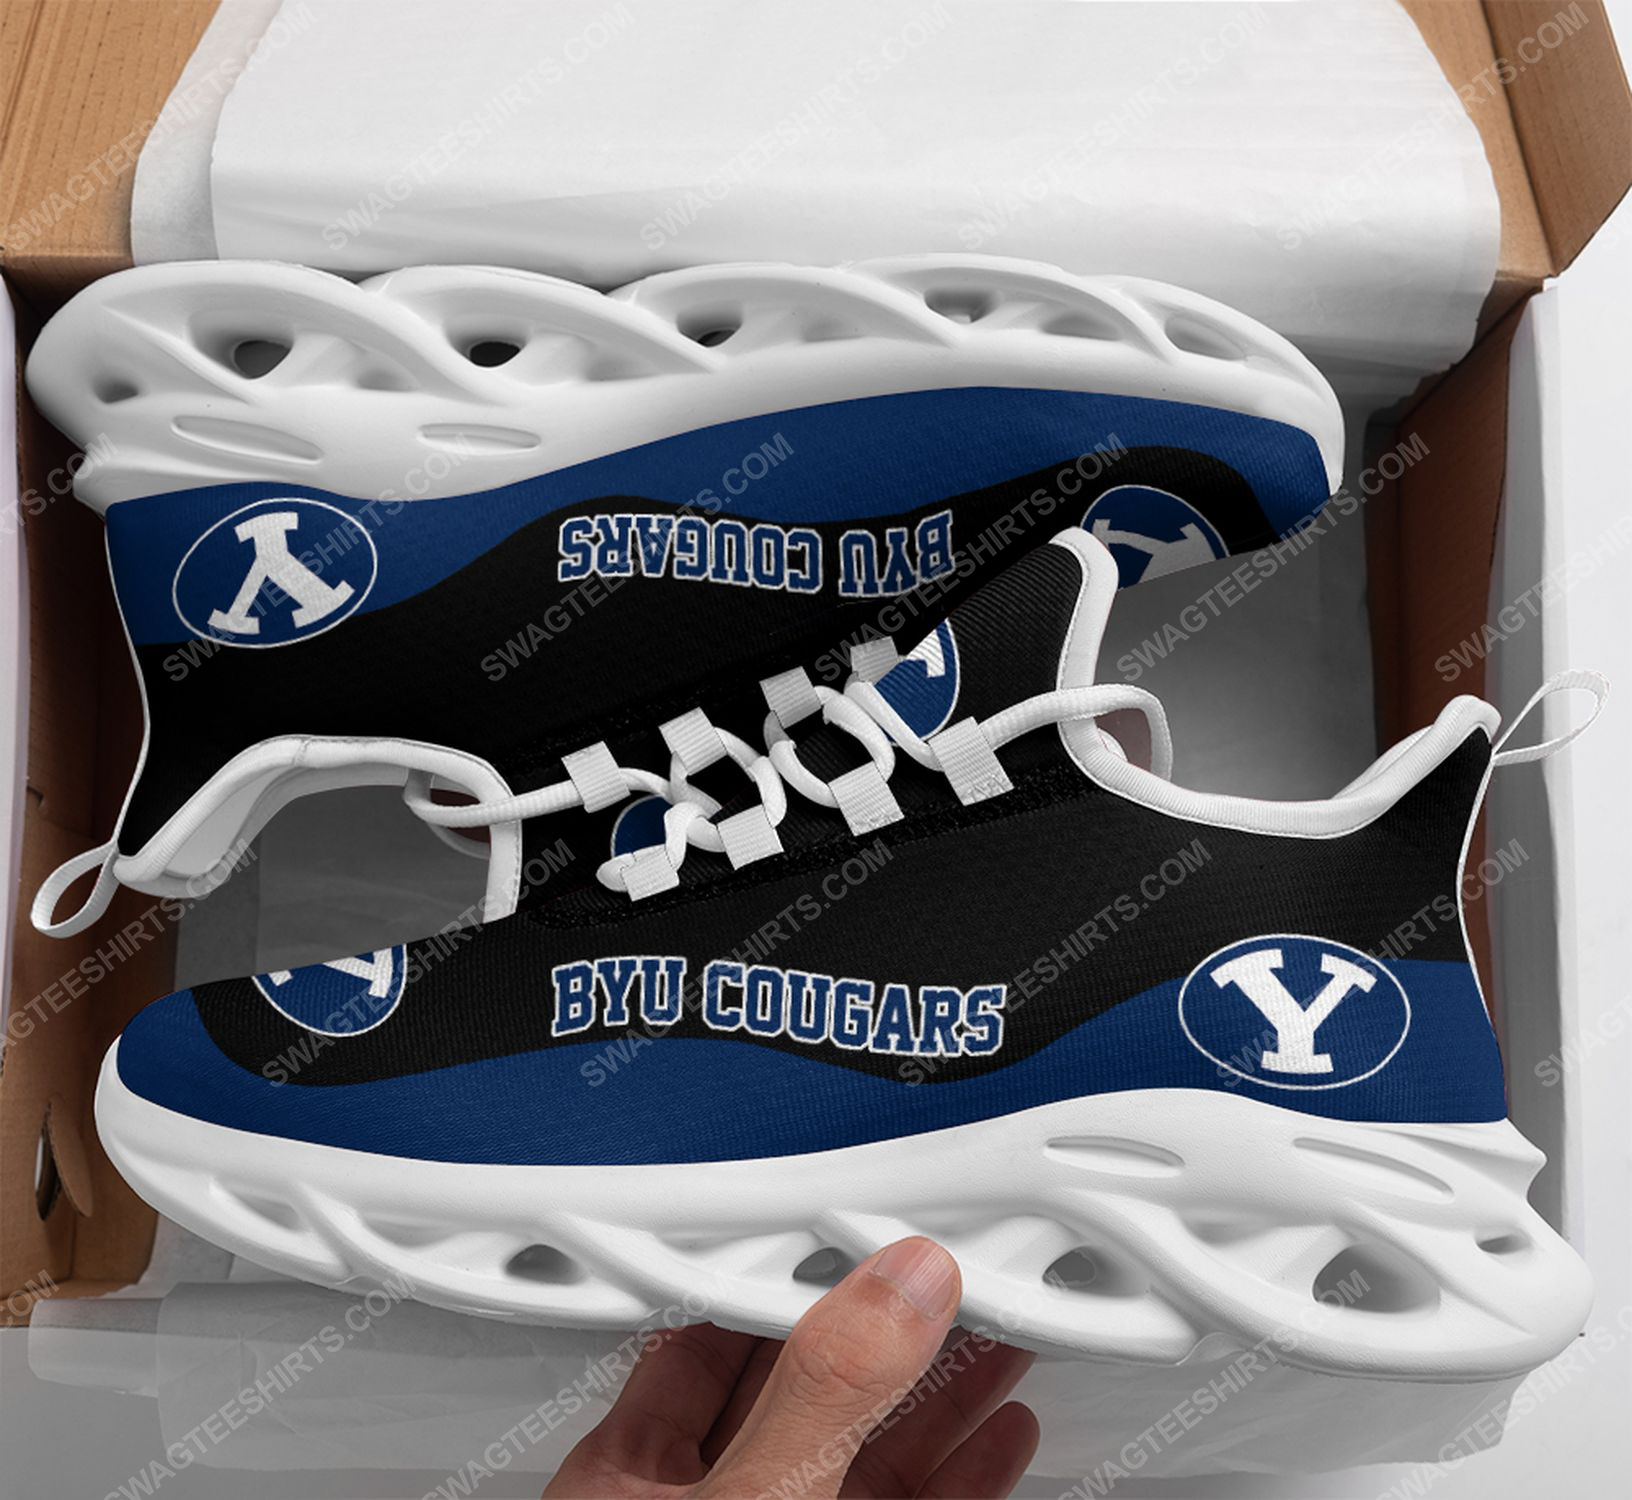 The byu cougars football team max soul shoes 1